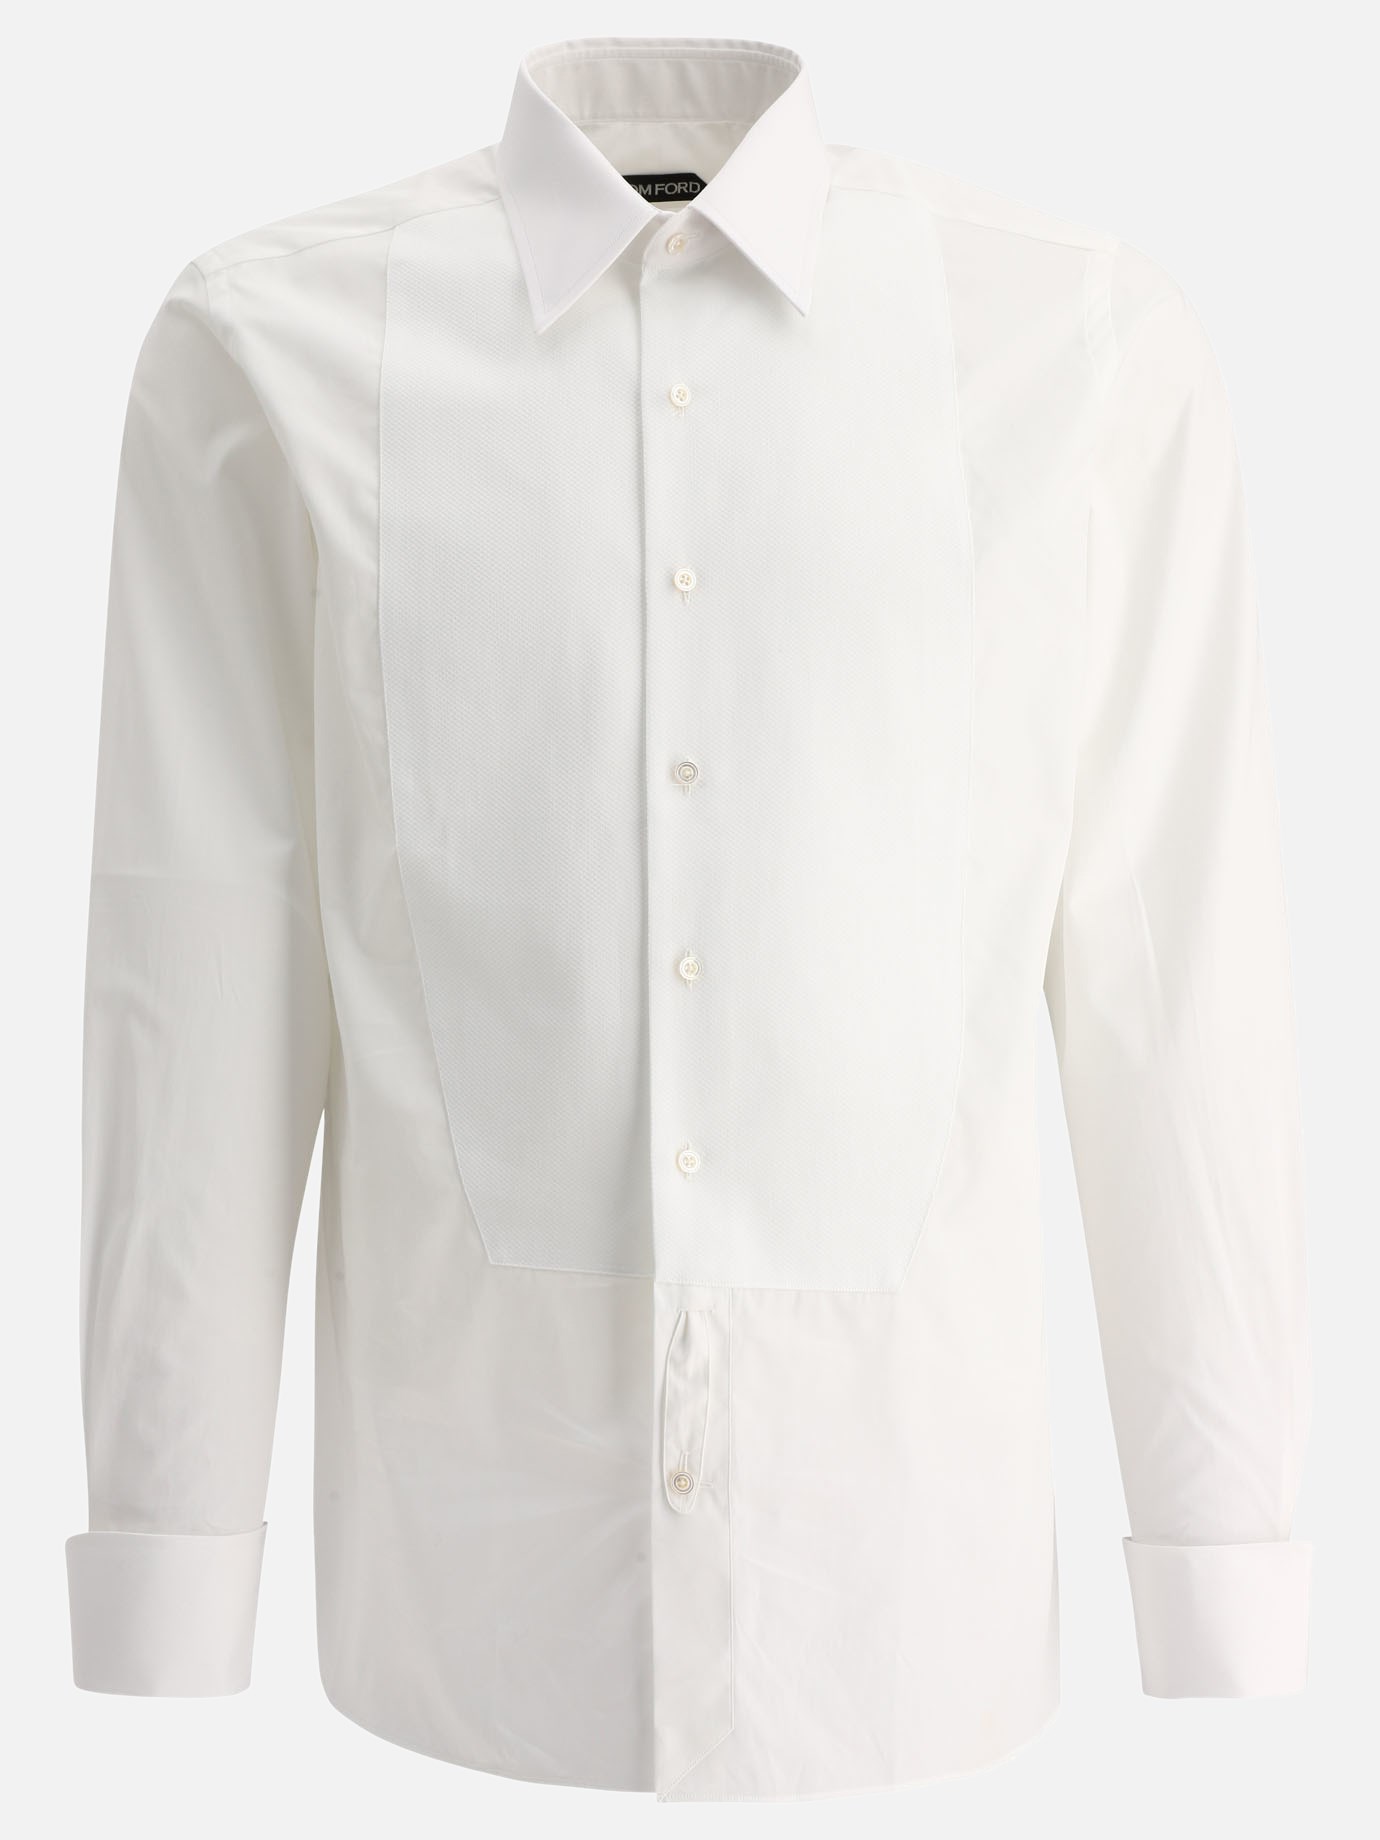 Camicia  French Cuff by Tom Ford - 2